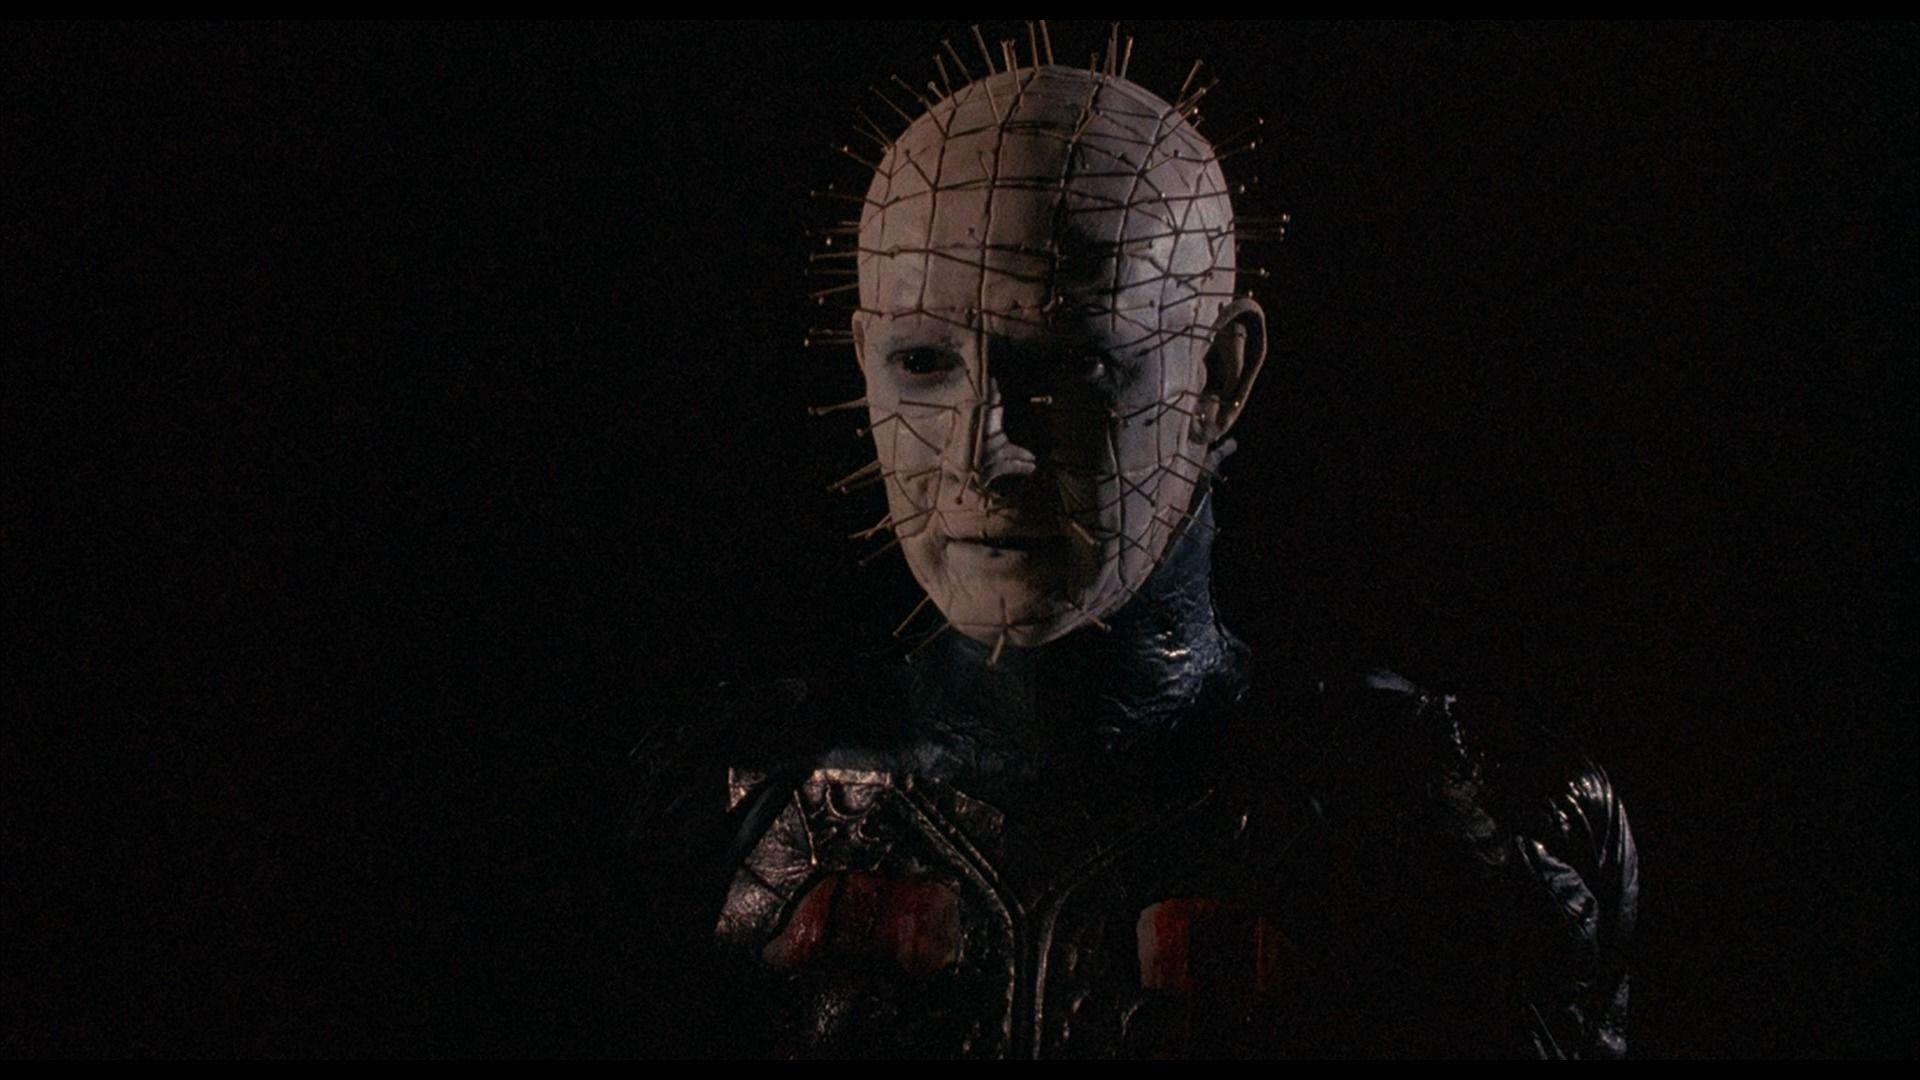 Hellraiser - Pinhead - played by Doug Bradley | Hellraiser, Scary wallpaper,  Scary monsters